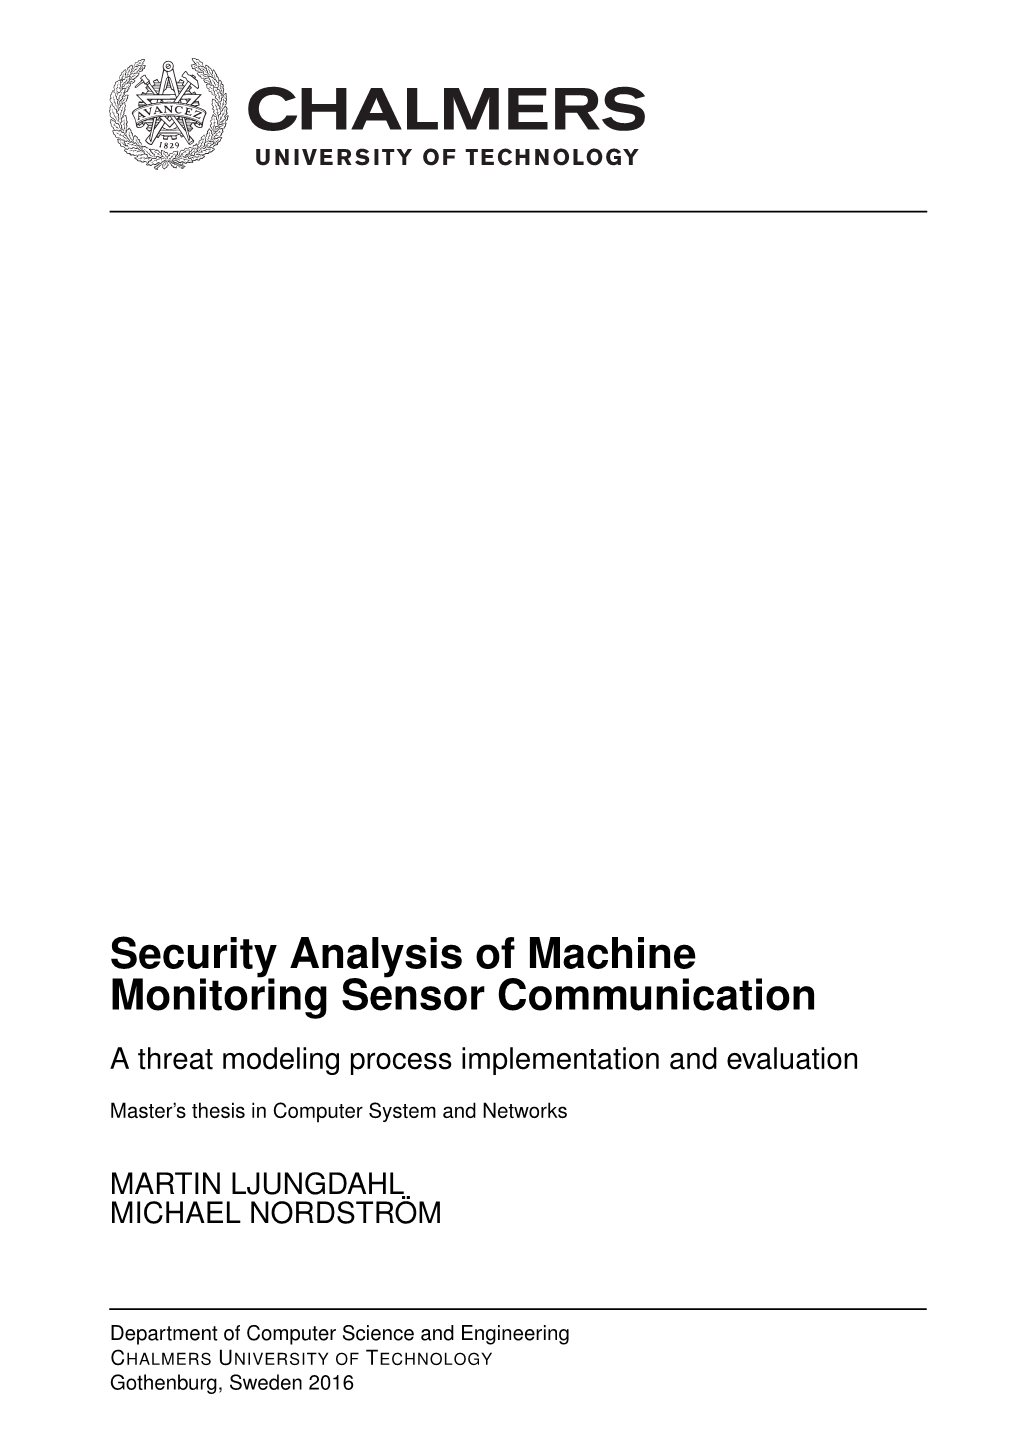 Security Analysis of Machine Monitoring Sensor Communication a Threat Modeling Process Implementation and Evaluation